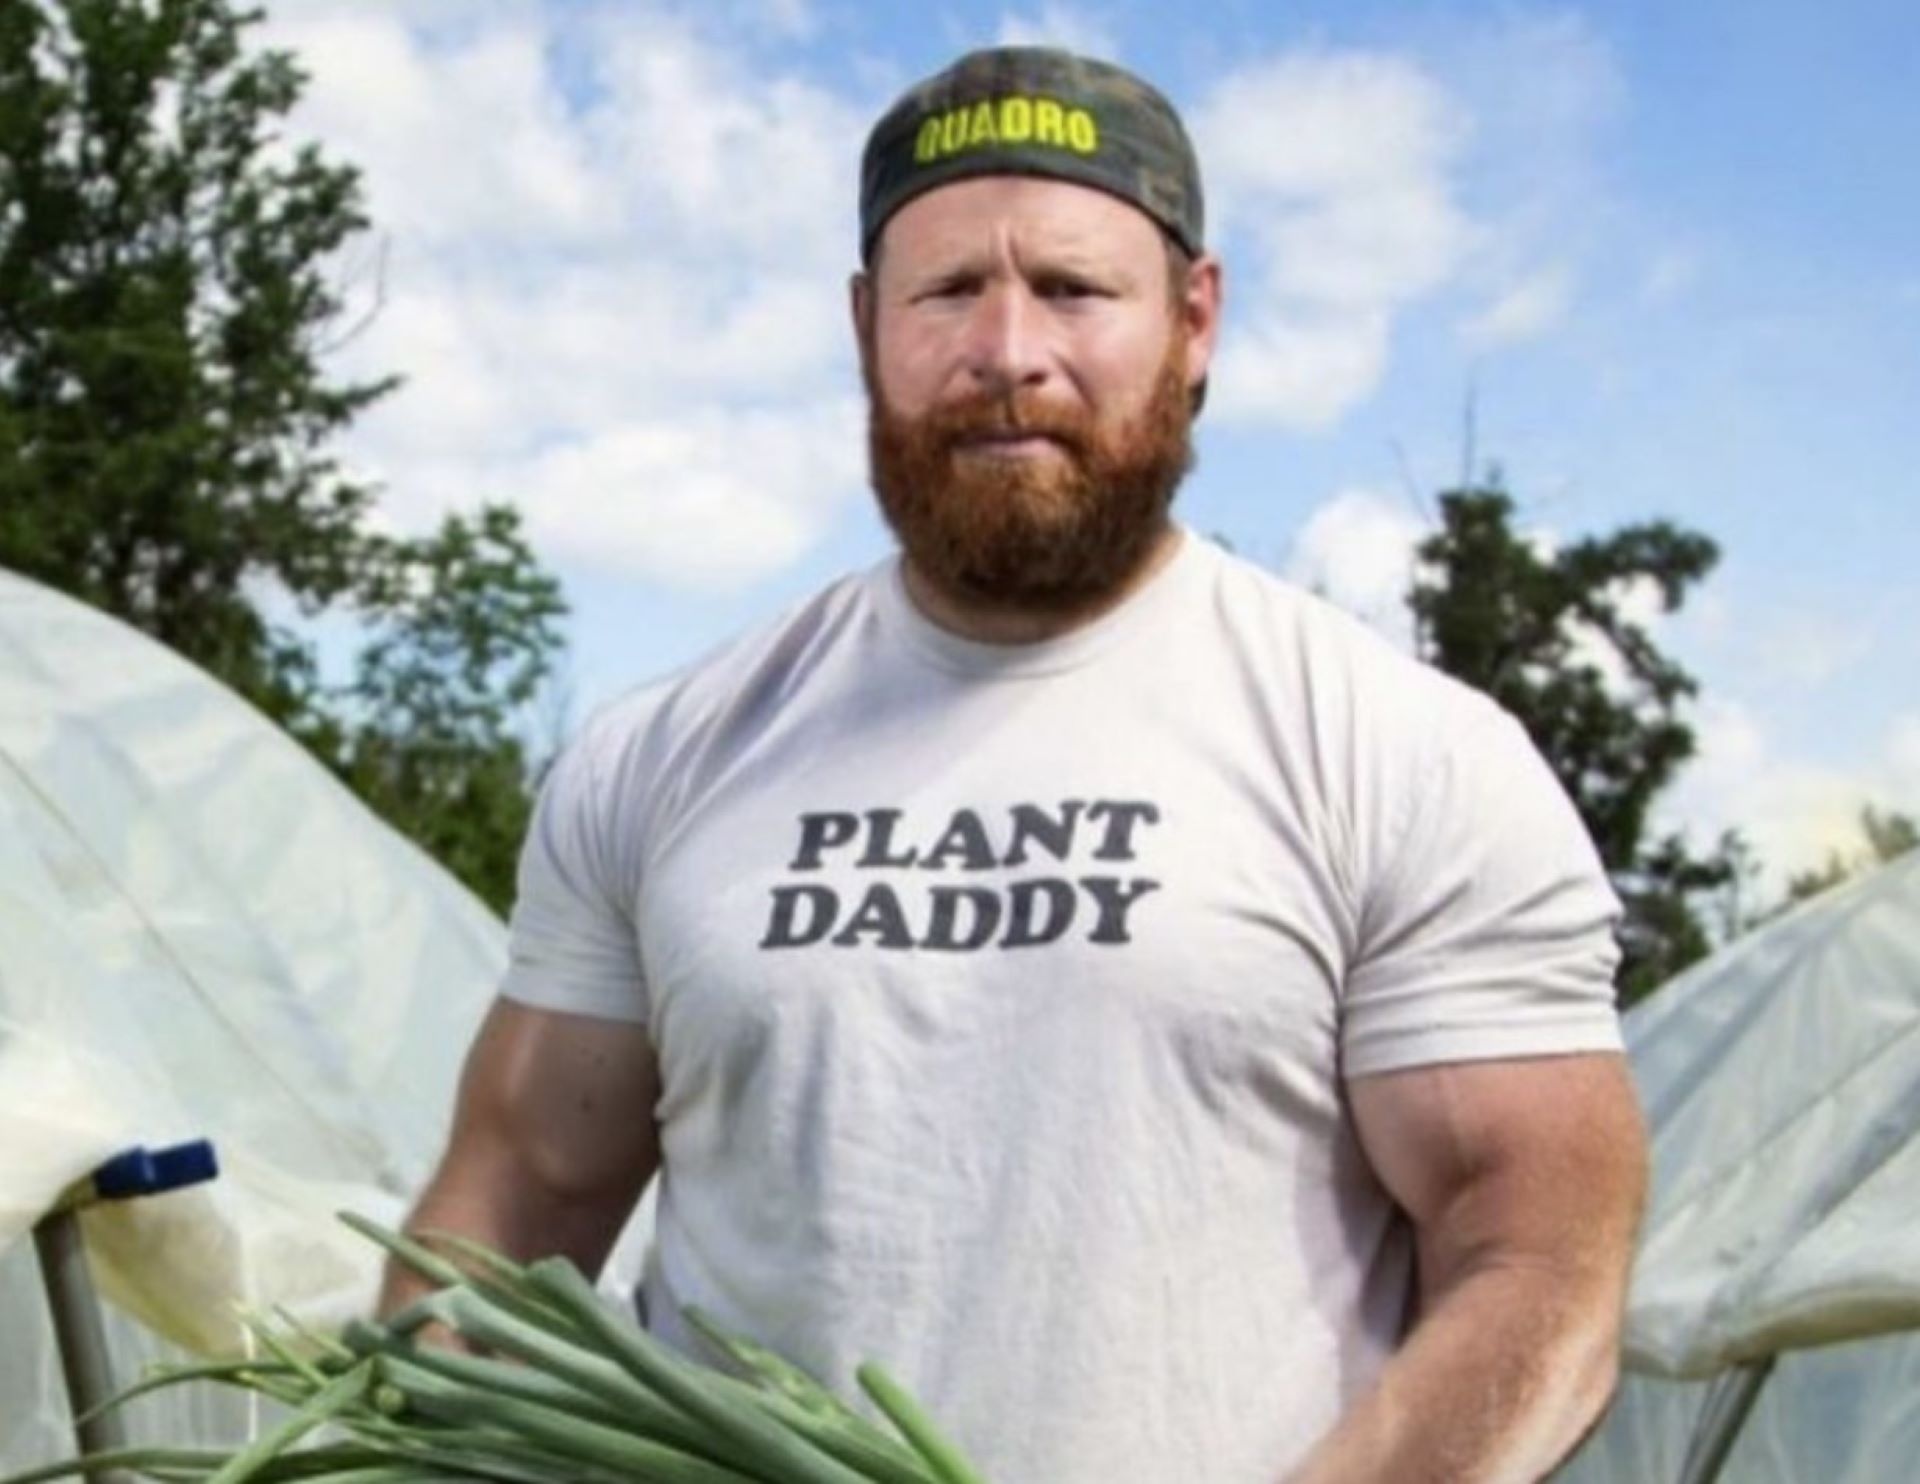 Texas farmer takes on big grocery chains with his half-acre garden: 'I want to be the reason why Walmart can’t sell produce'